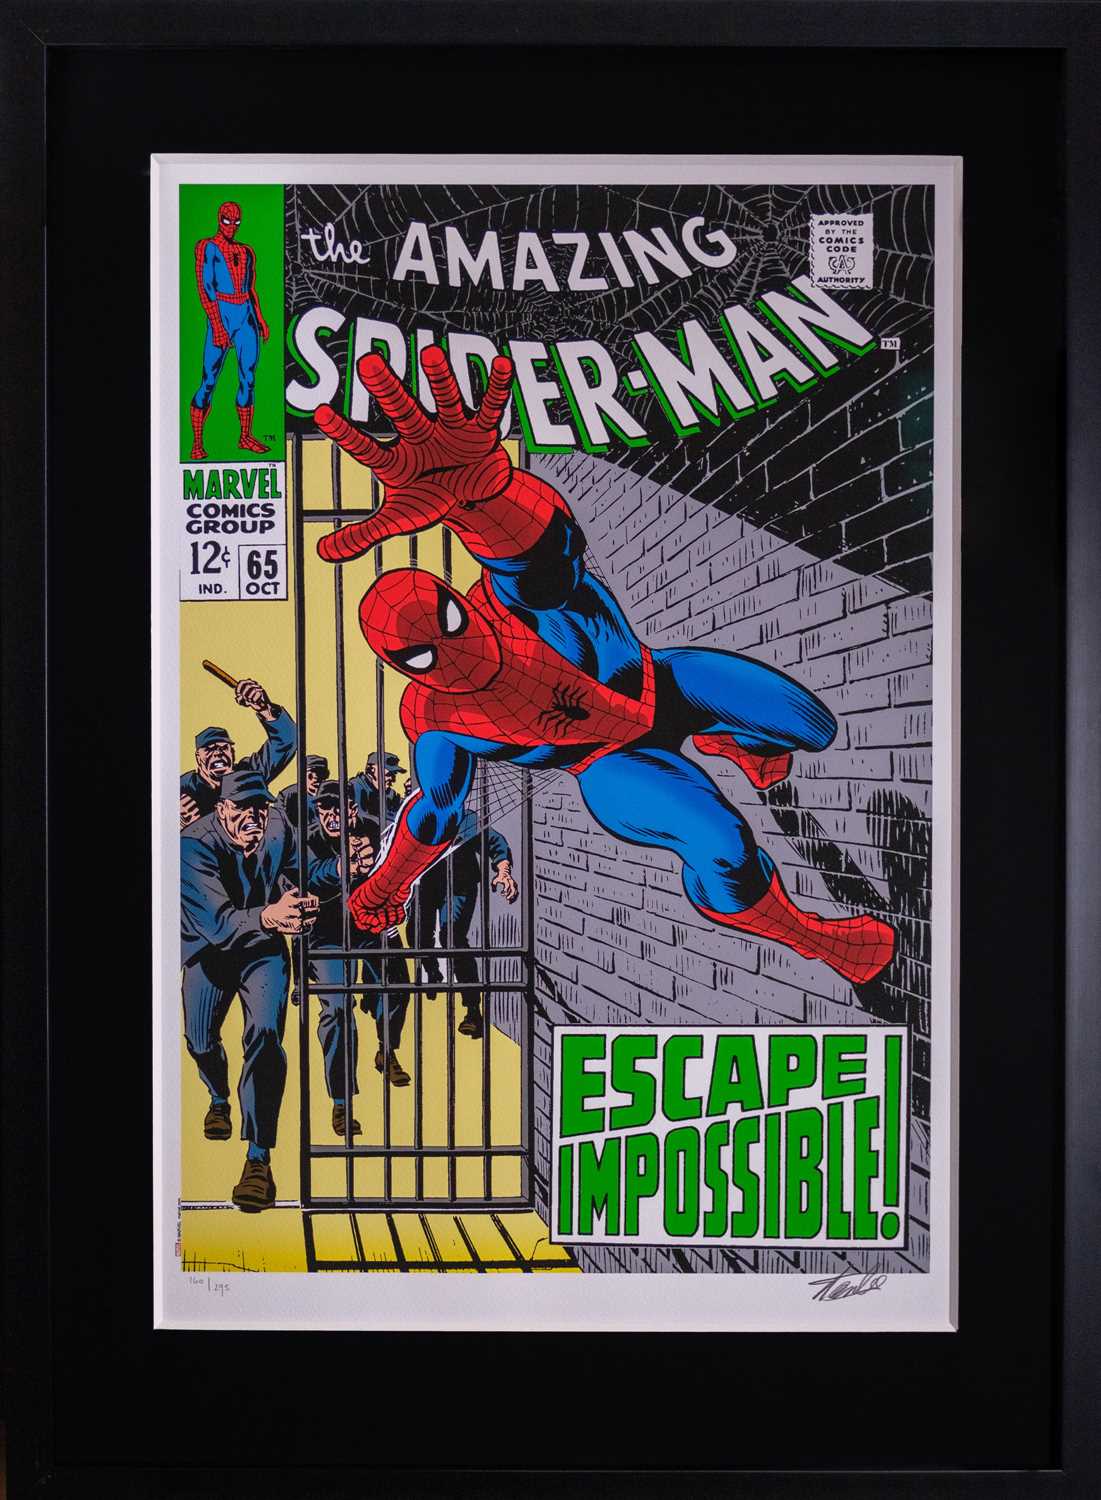 (Signed) Stan LEE (1922-2018) The Amazing Spider-Man #65 - Escape Impossible! - Image 2 of 5